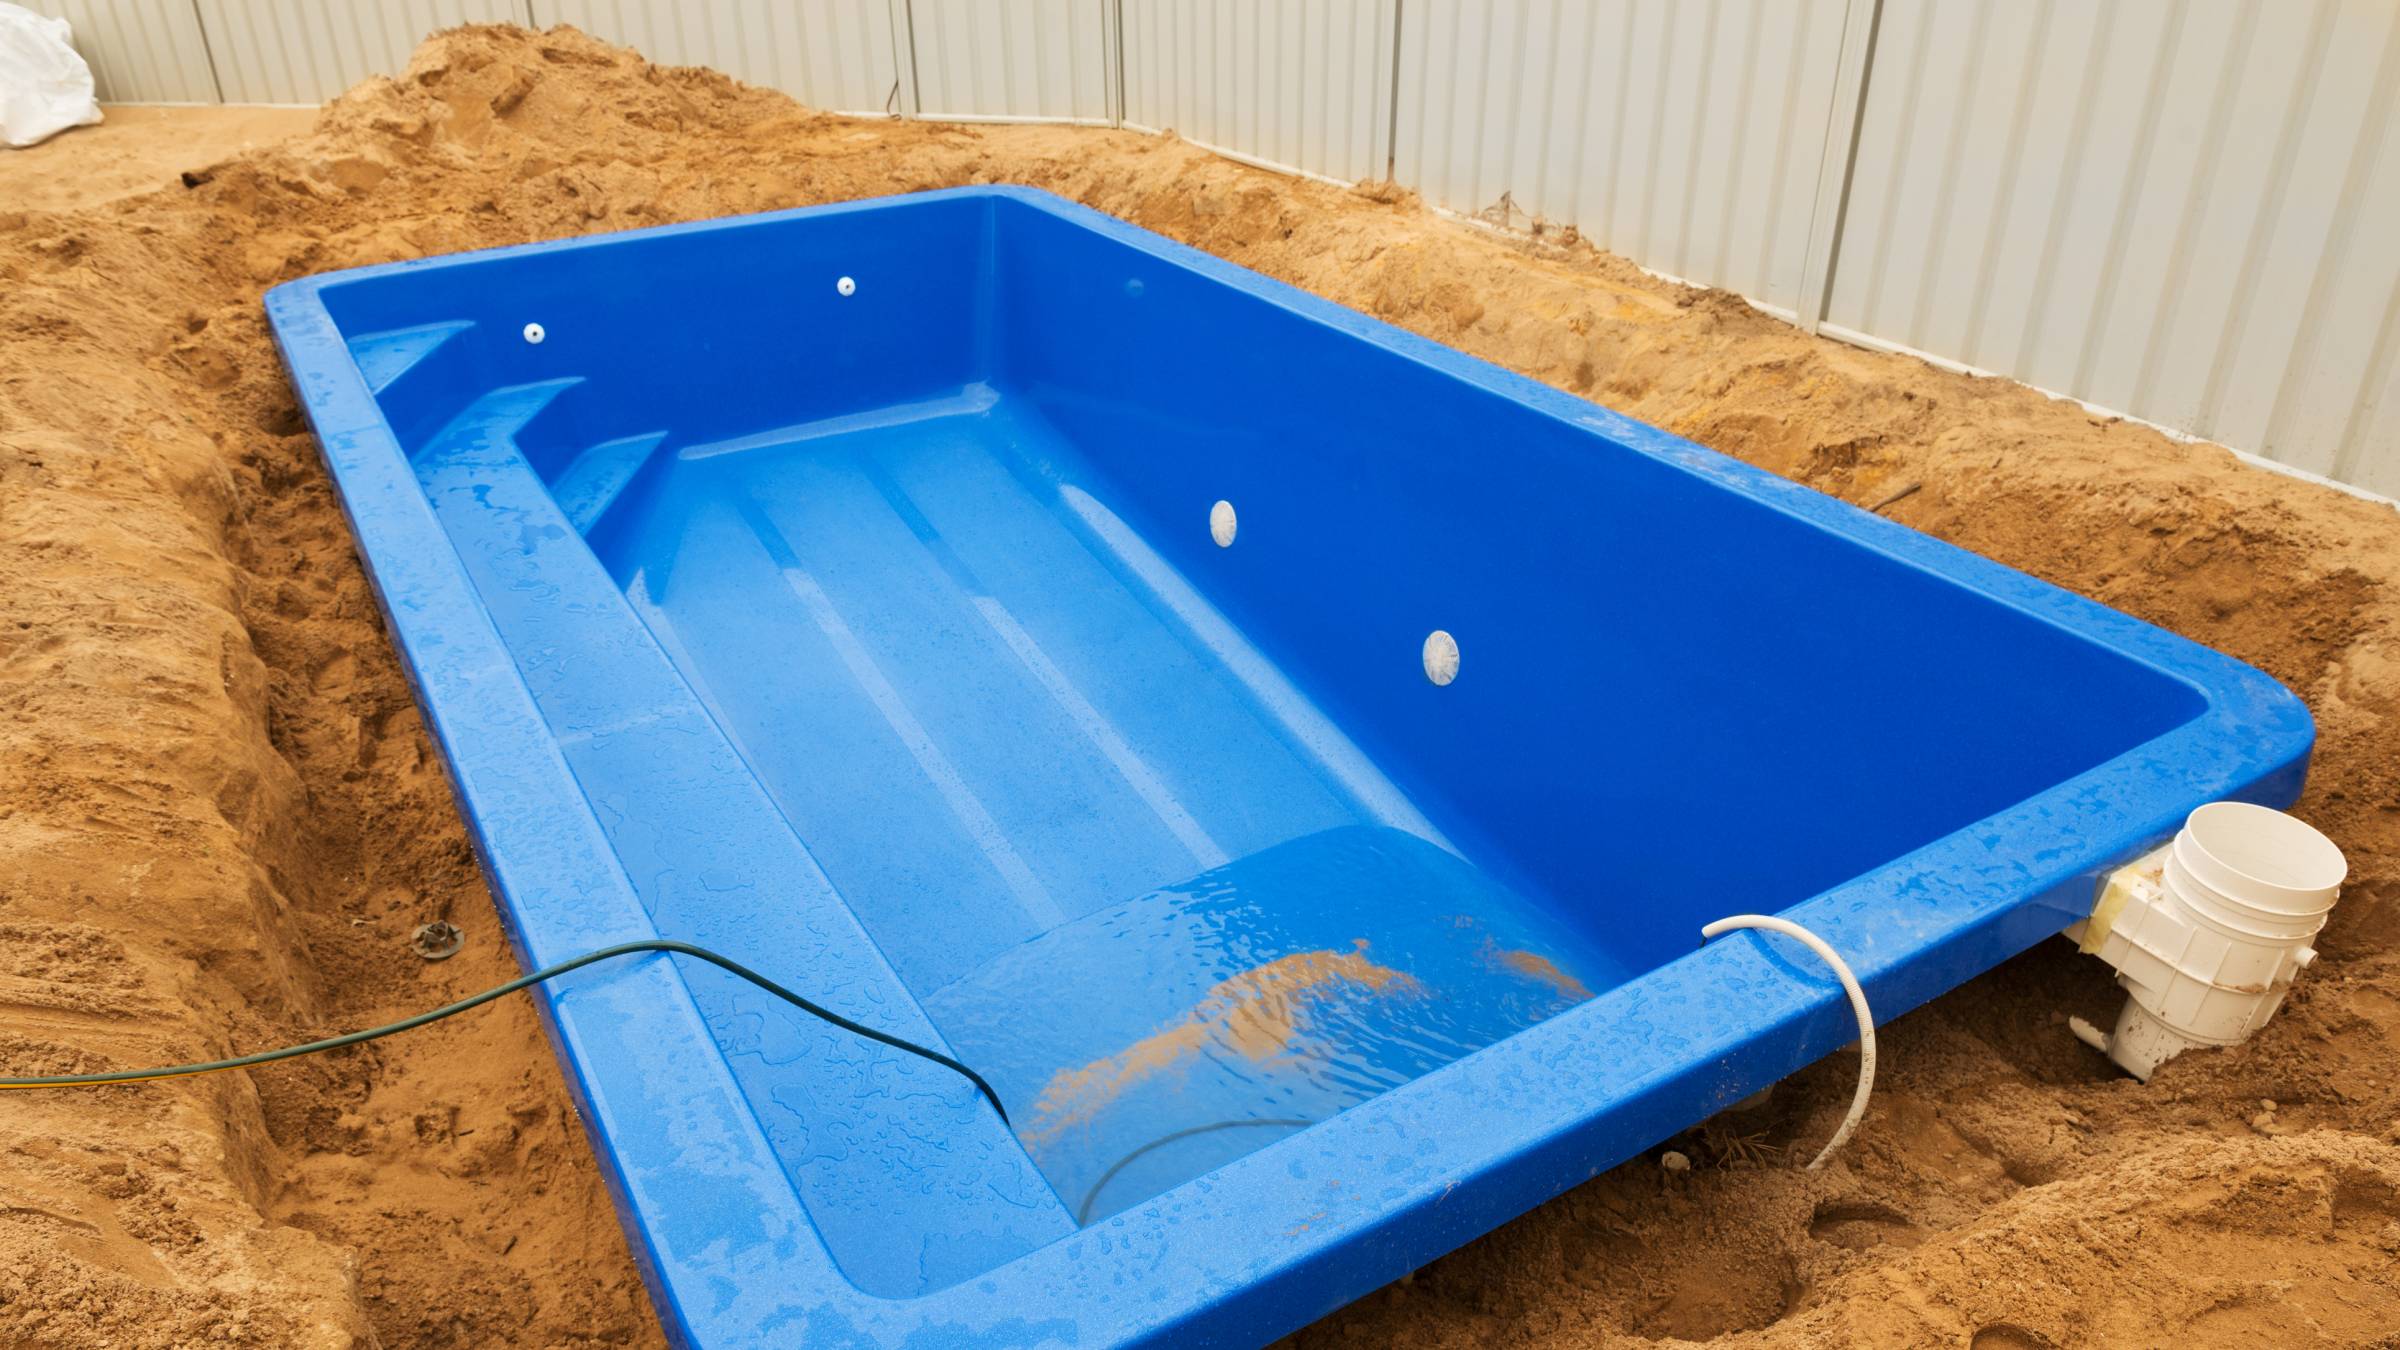 installing a fibreglass plunge pool in the backyard